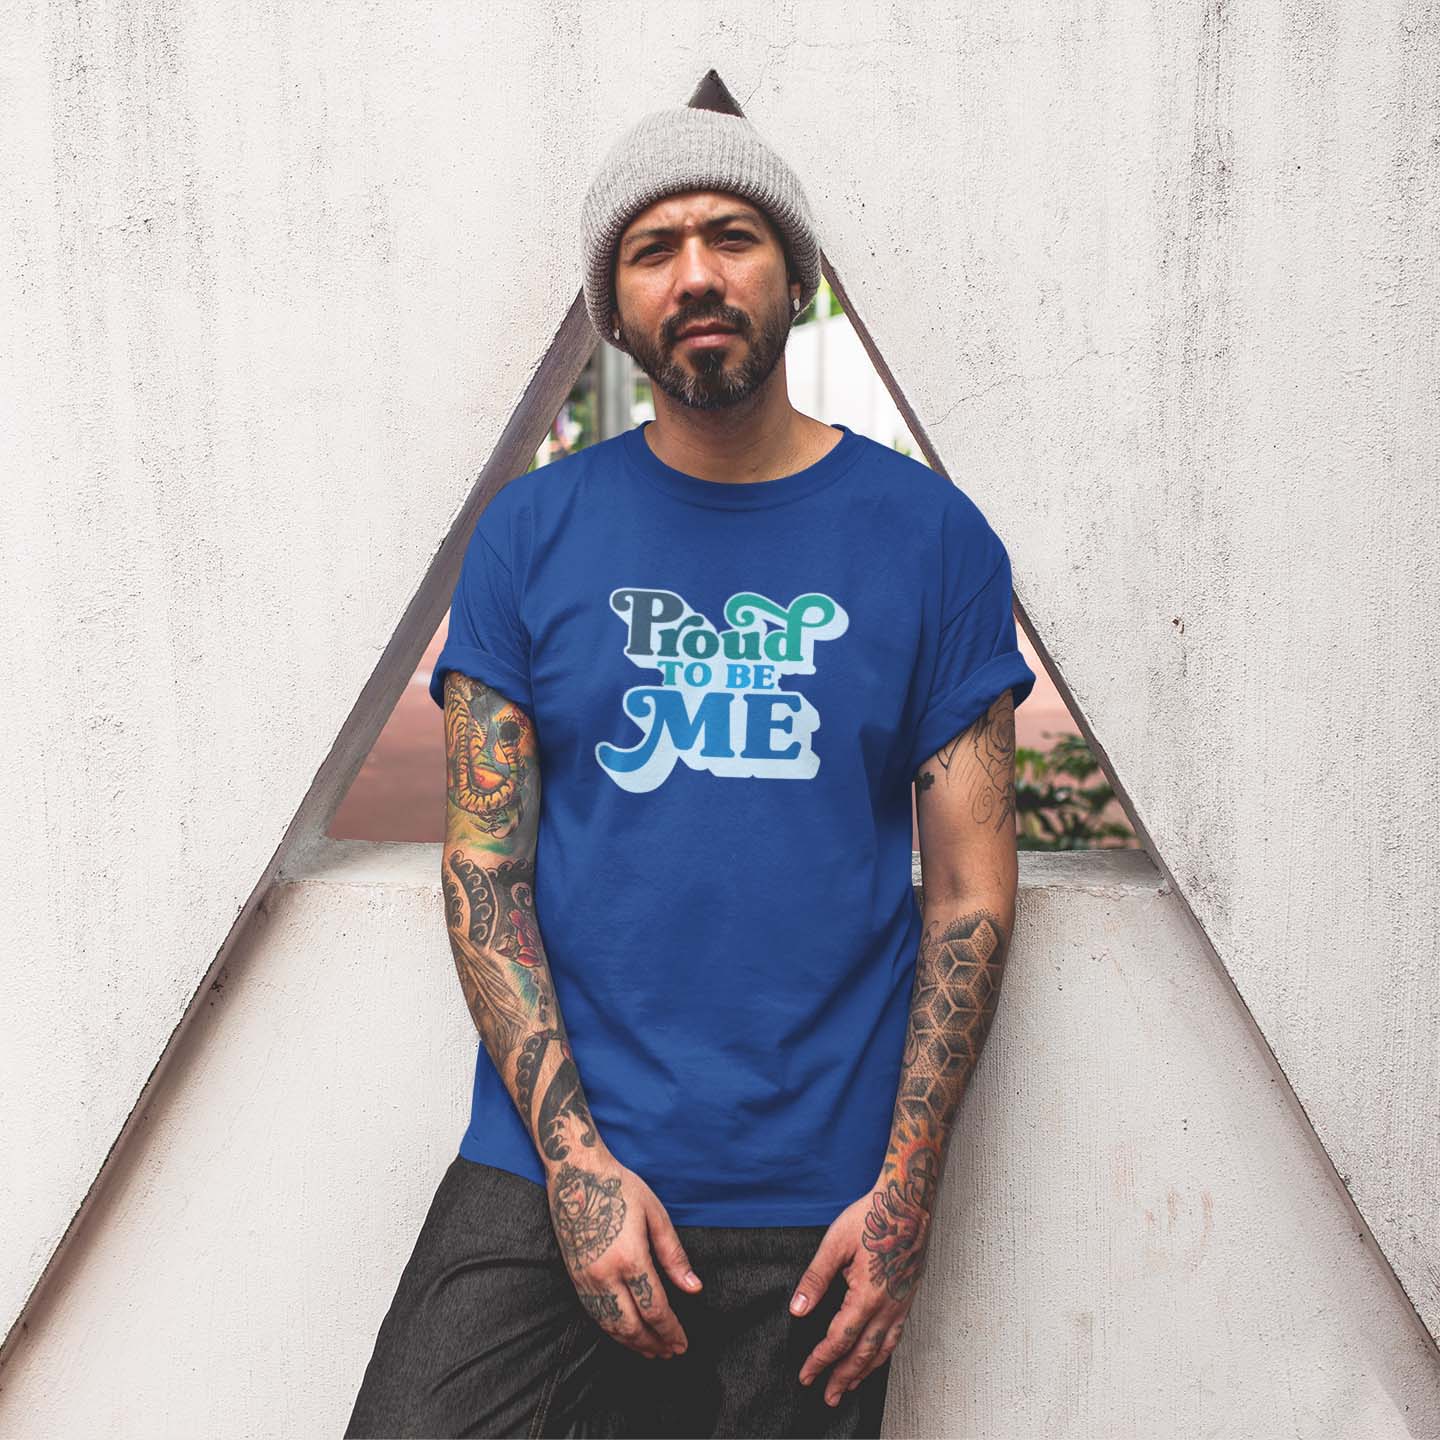 Royal Blue men’s T-shirt with PROUD TO BE ME quote visible at the front of the shirt. If you’re proud of the man you are, this is the perfect T-shirt for you!